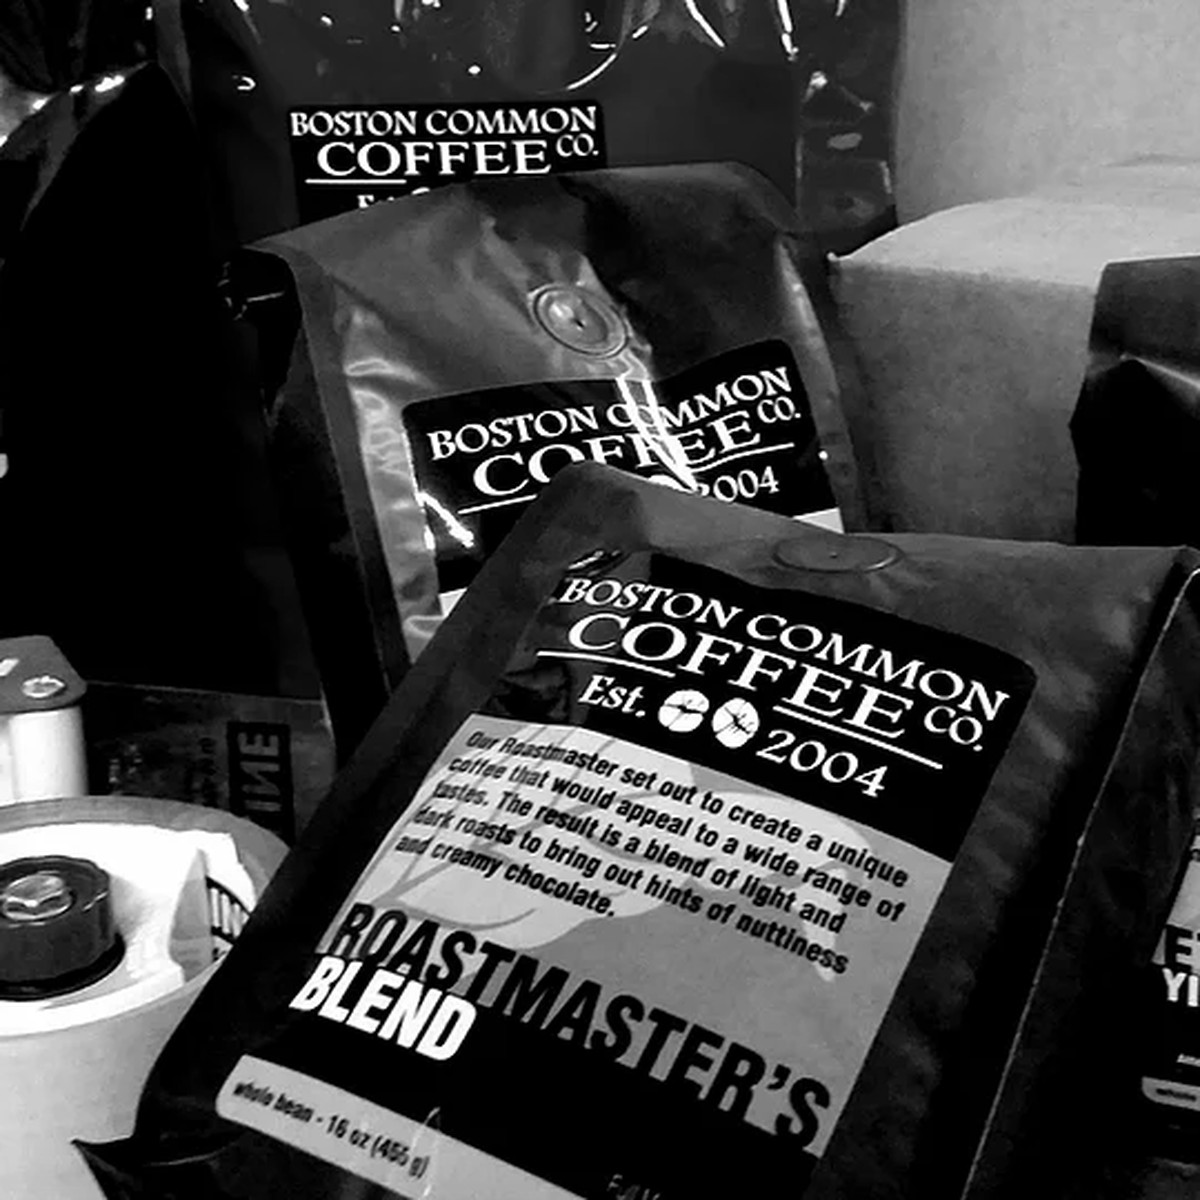 Black and white photo of several bags of coffee from Boston Common Coffee Company